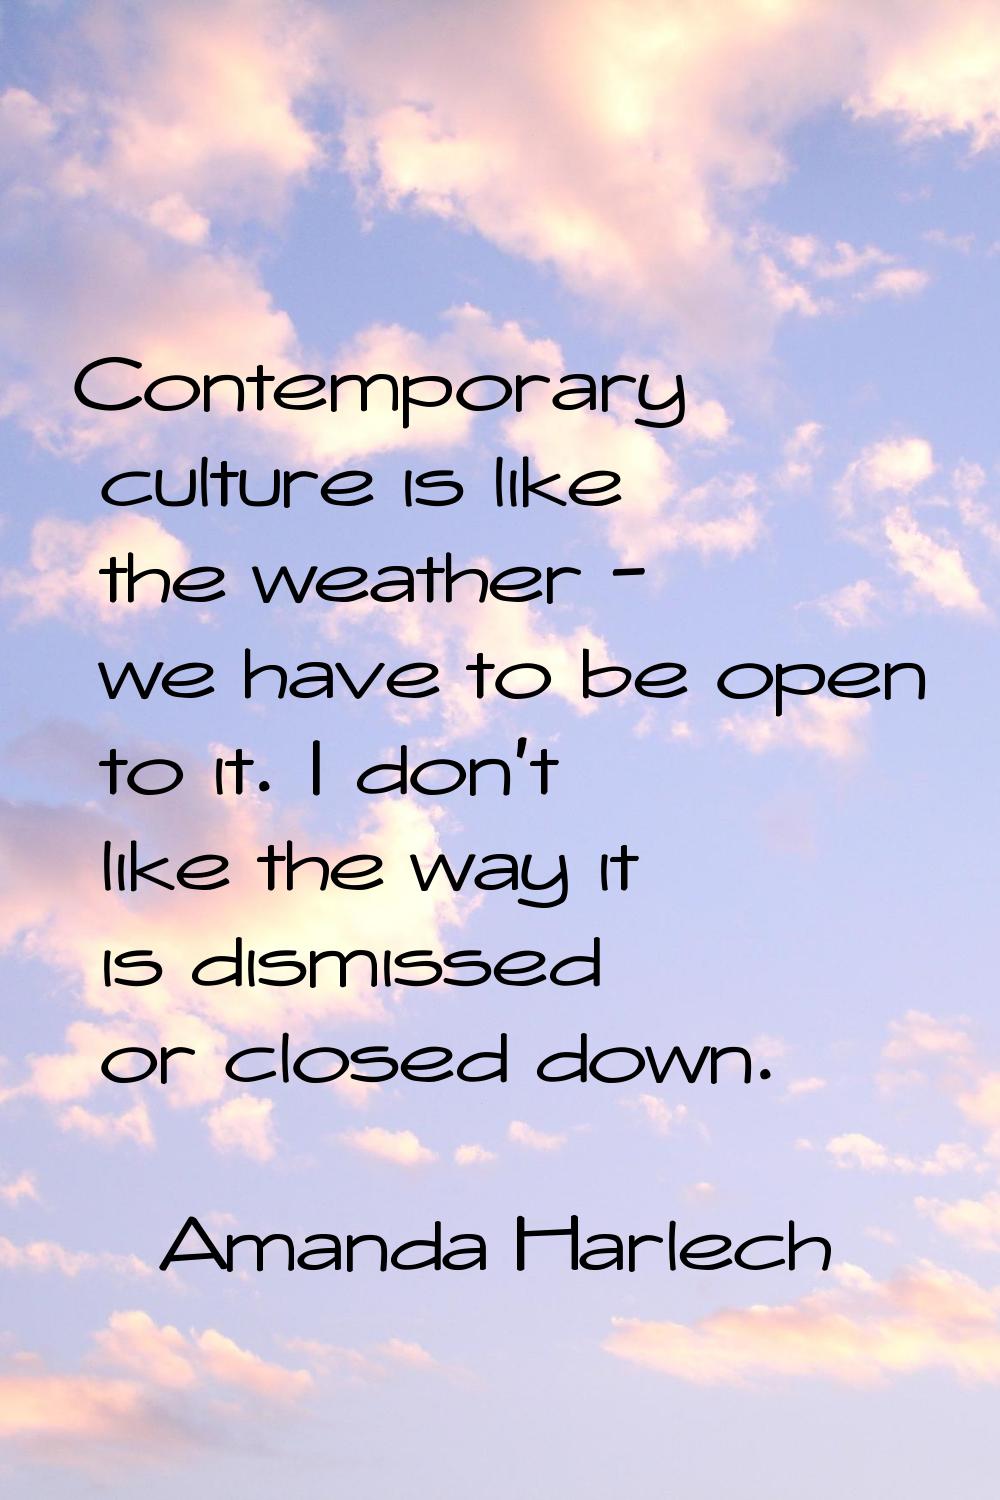 Contemporary culture is like the weather - we have to be open to it. I don't like the way it is dis